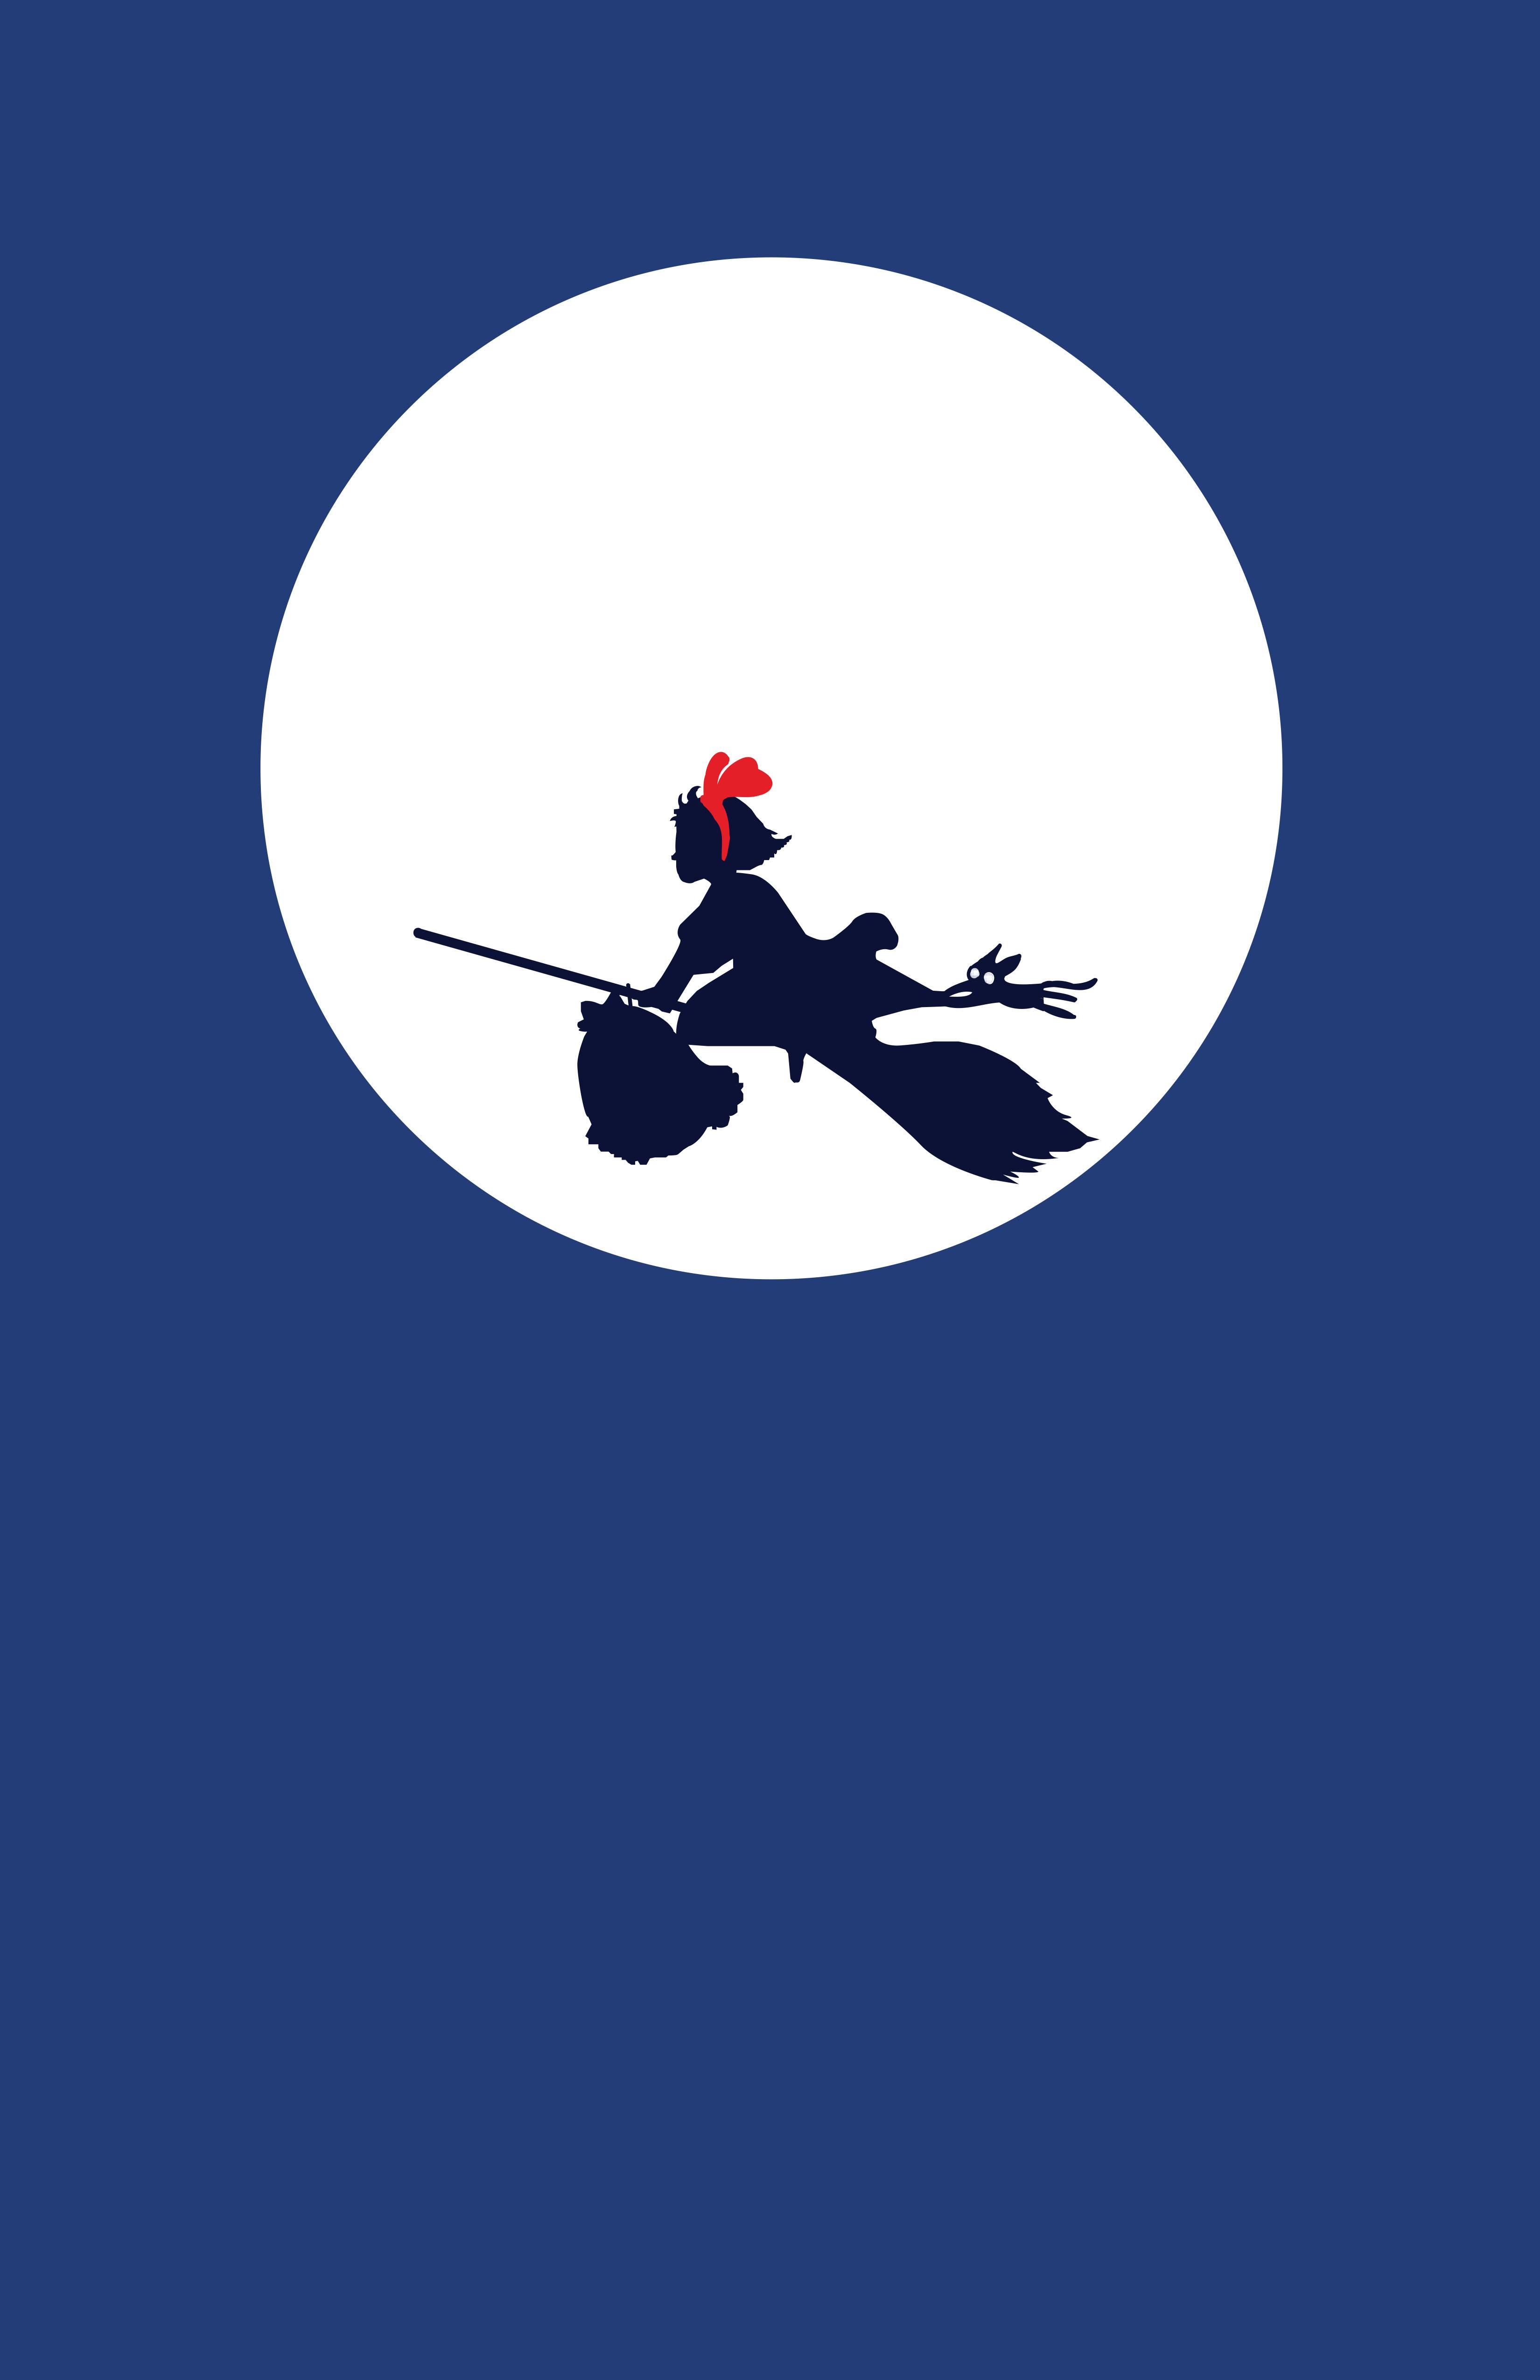 Kiki S Delivery Service Poster Skillshare Projects